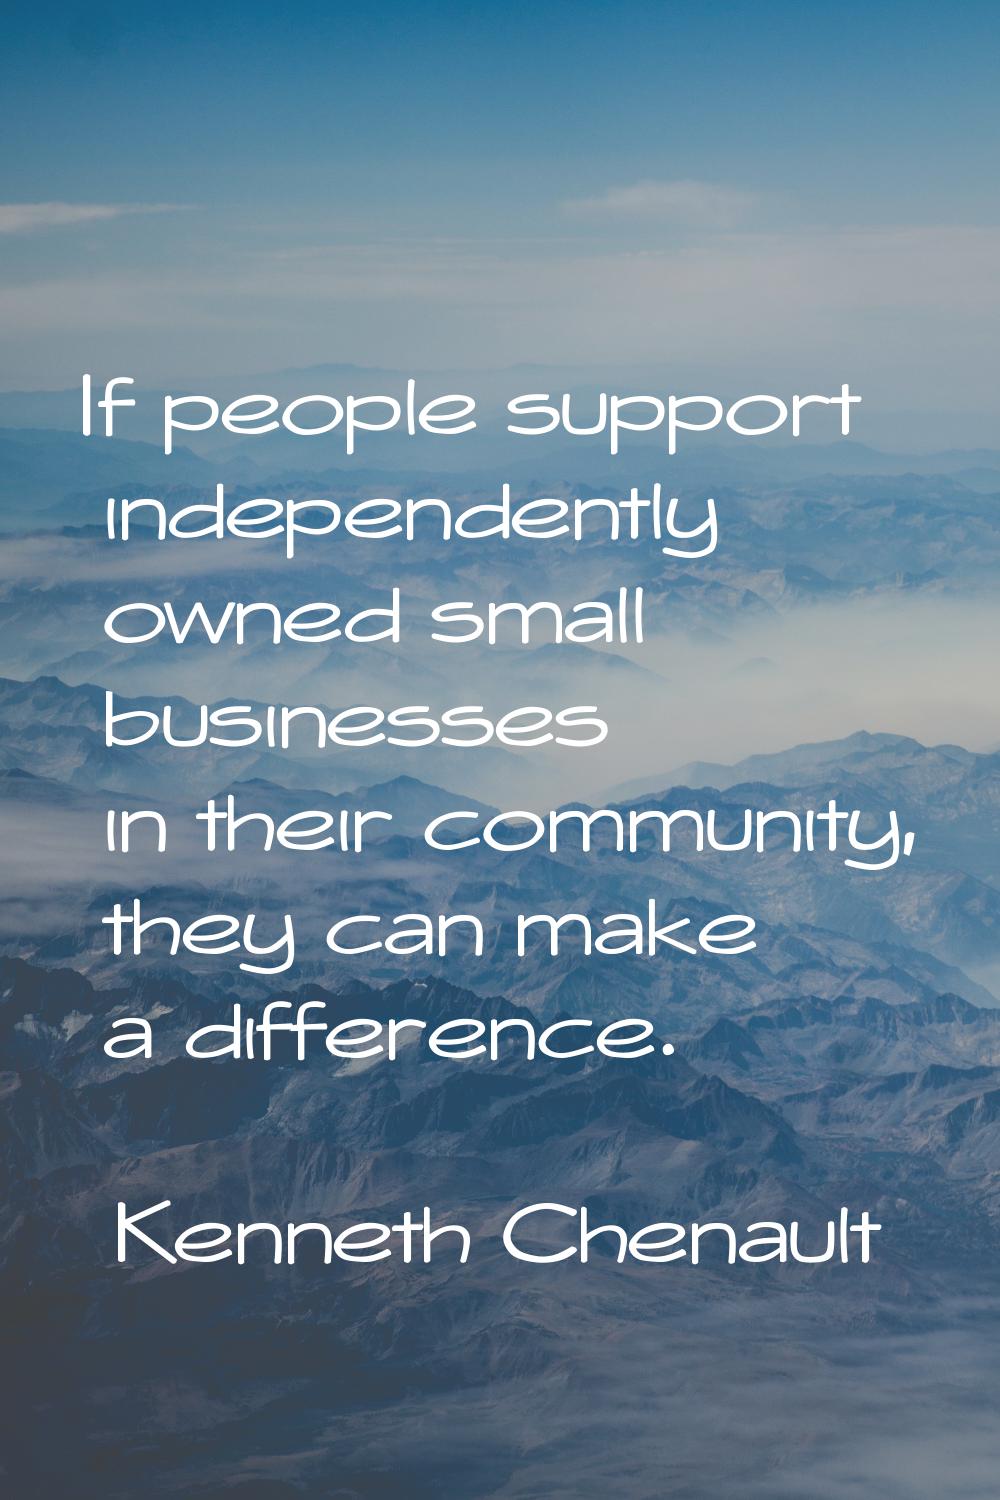 If people support independently owned small businesses in their community, they can make a differen